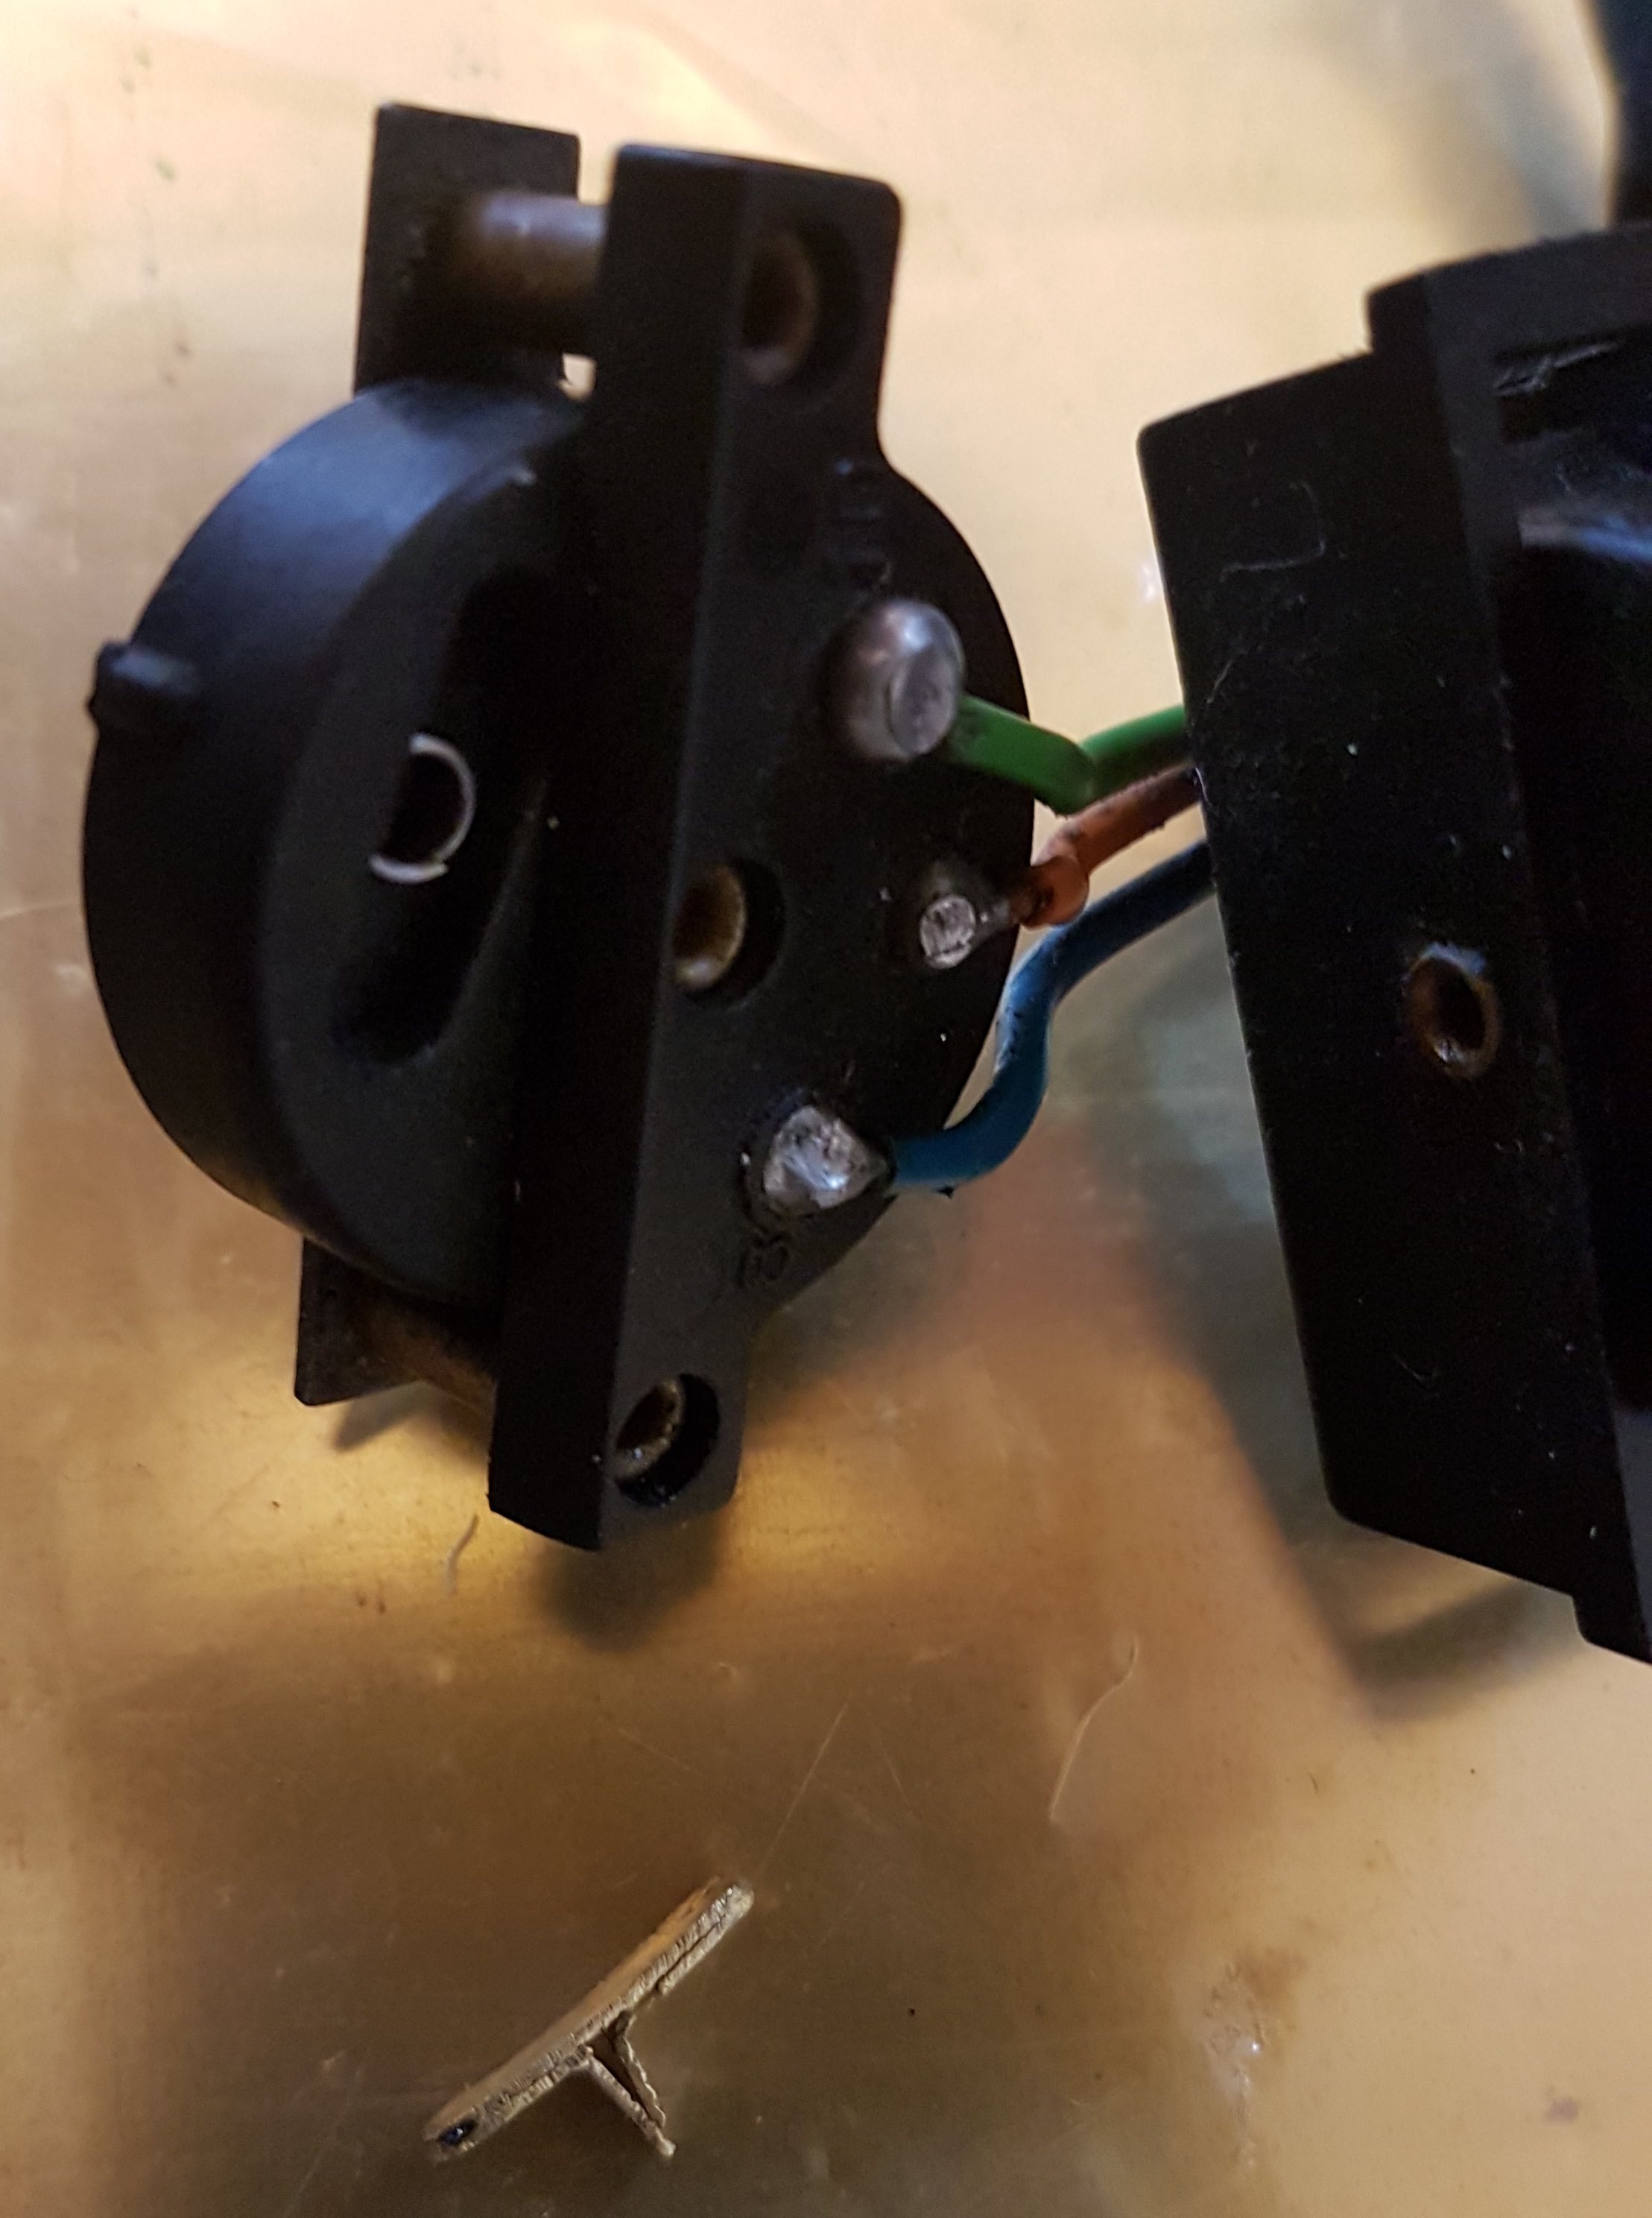 CEV206 Indicator switch and homebrew contact